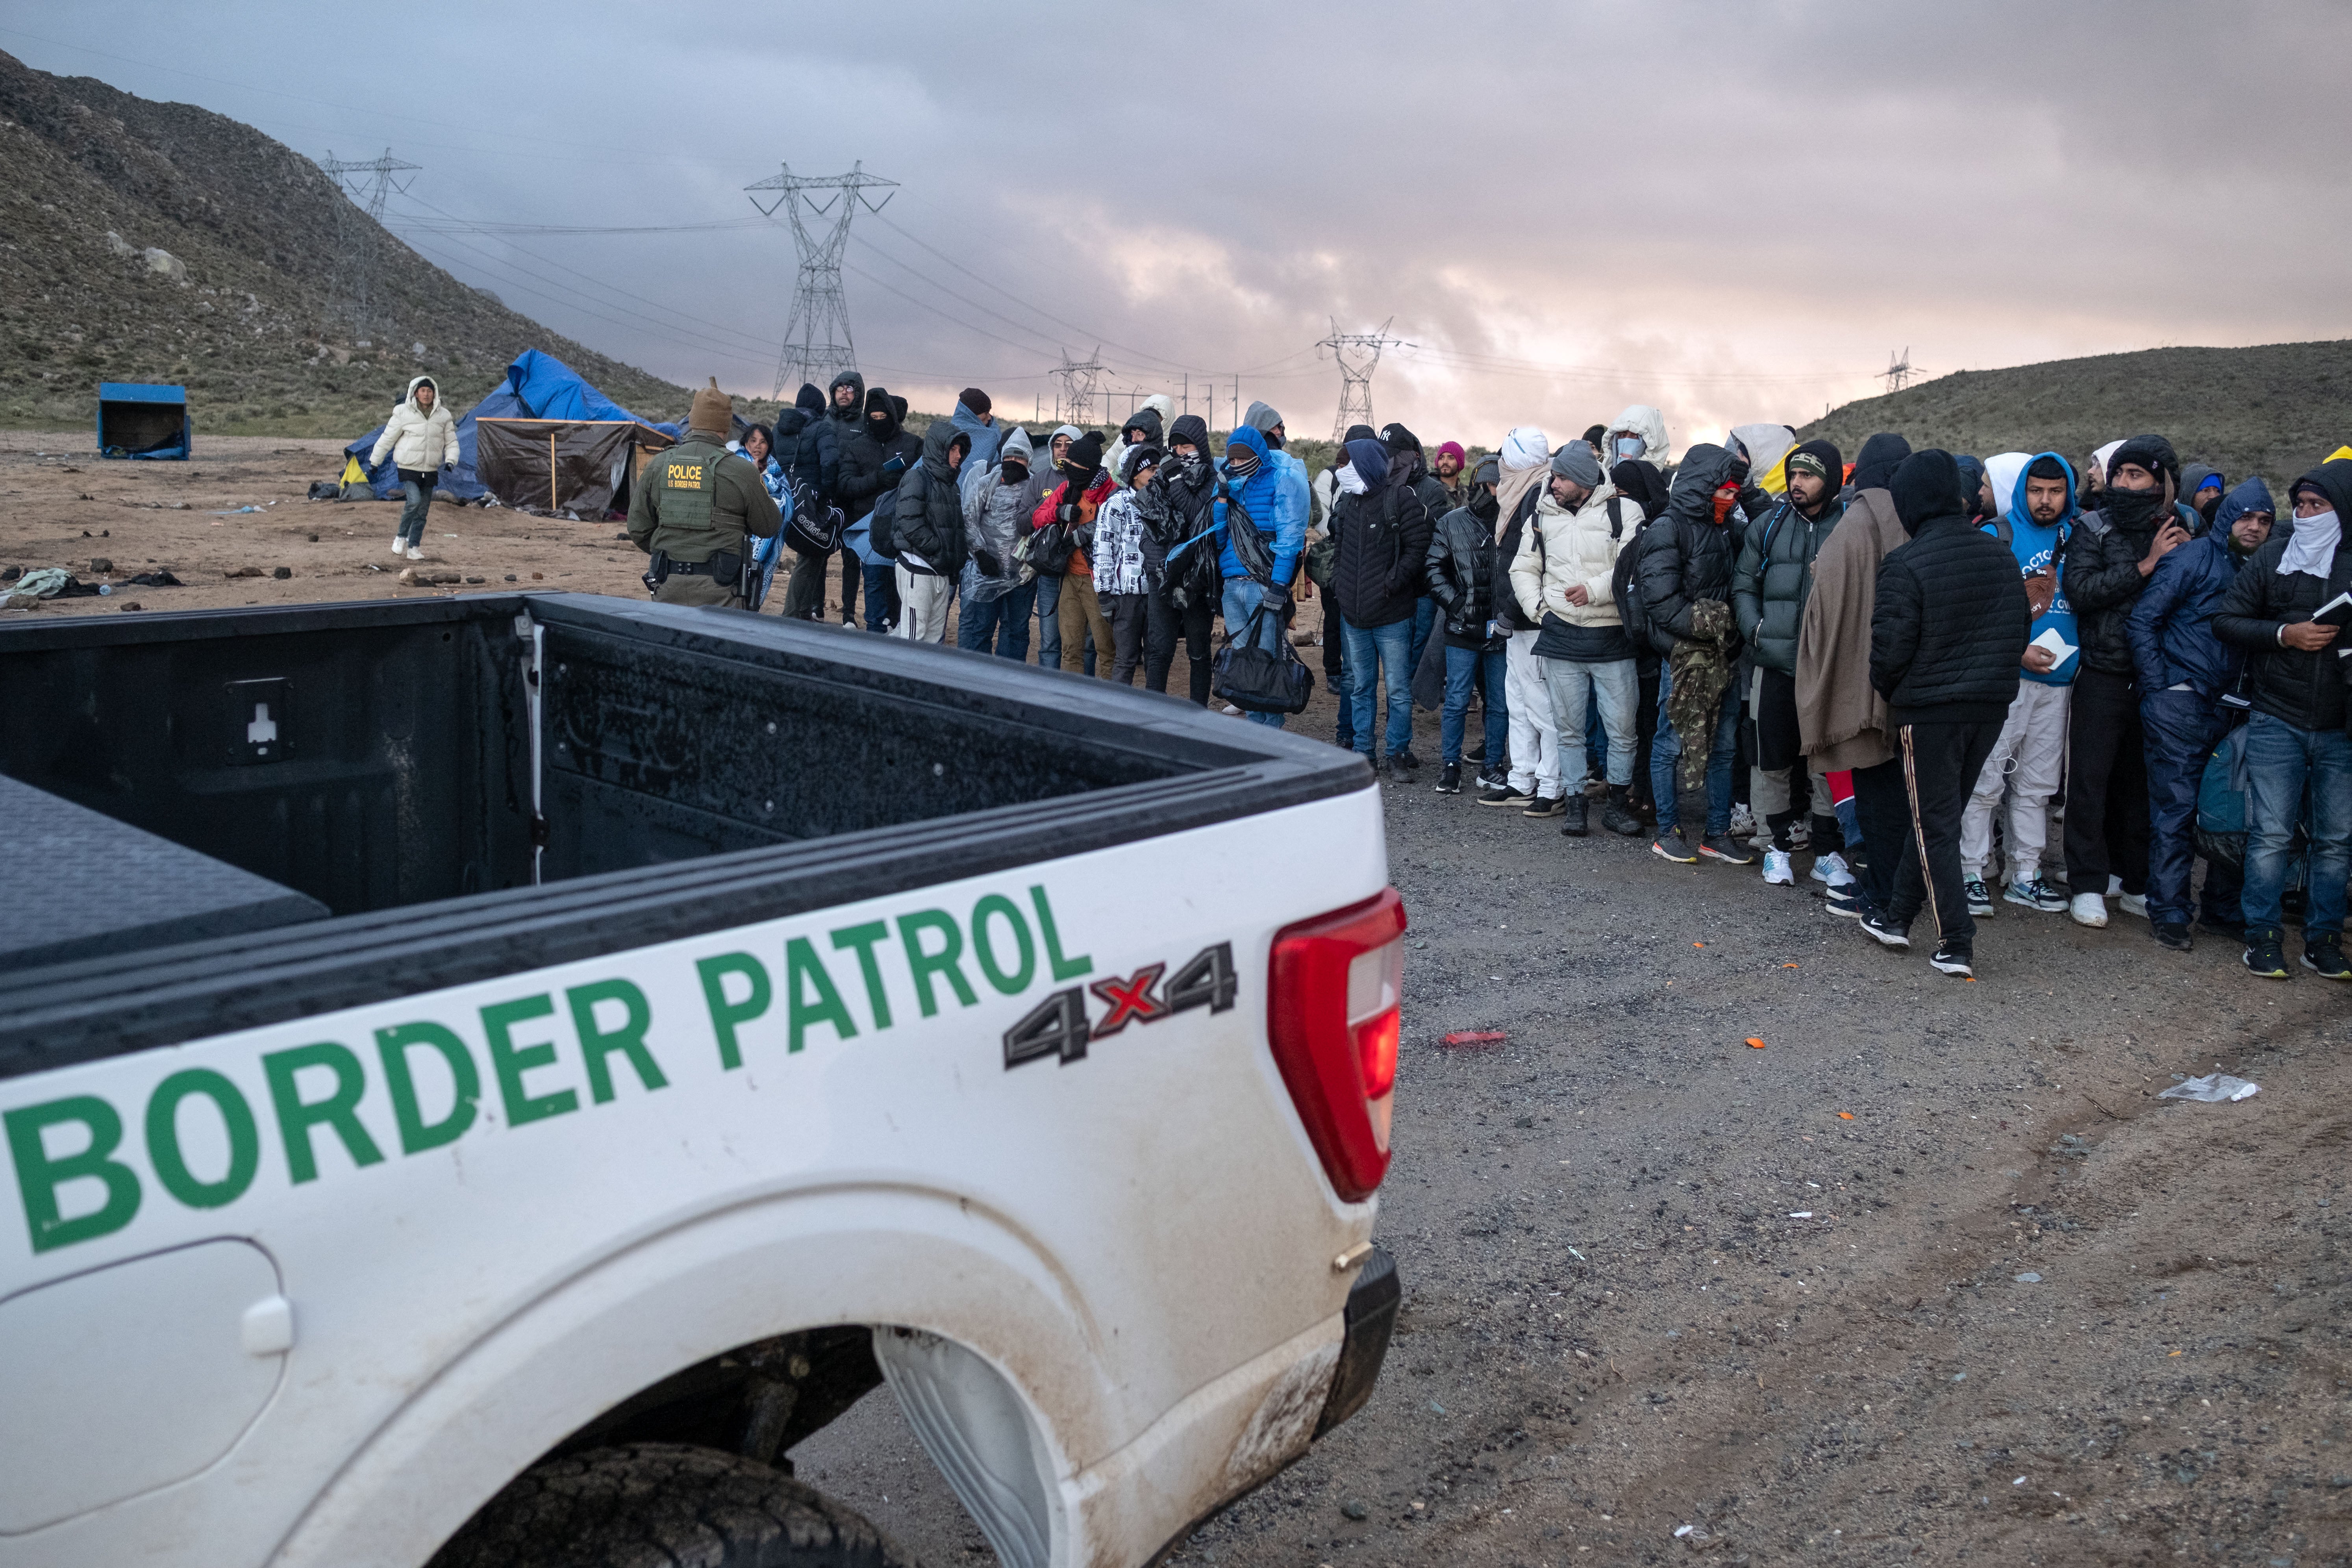 People seeking asylum wait in line to be processed by border patrol agents near the US-Mexico border outside California on 2 January